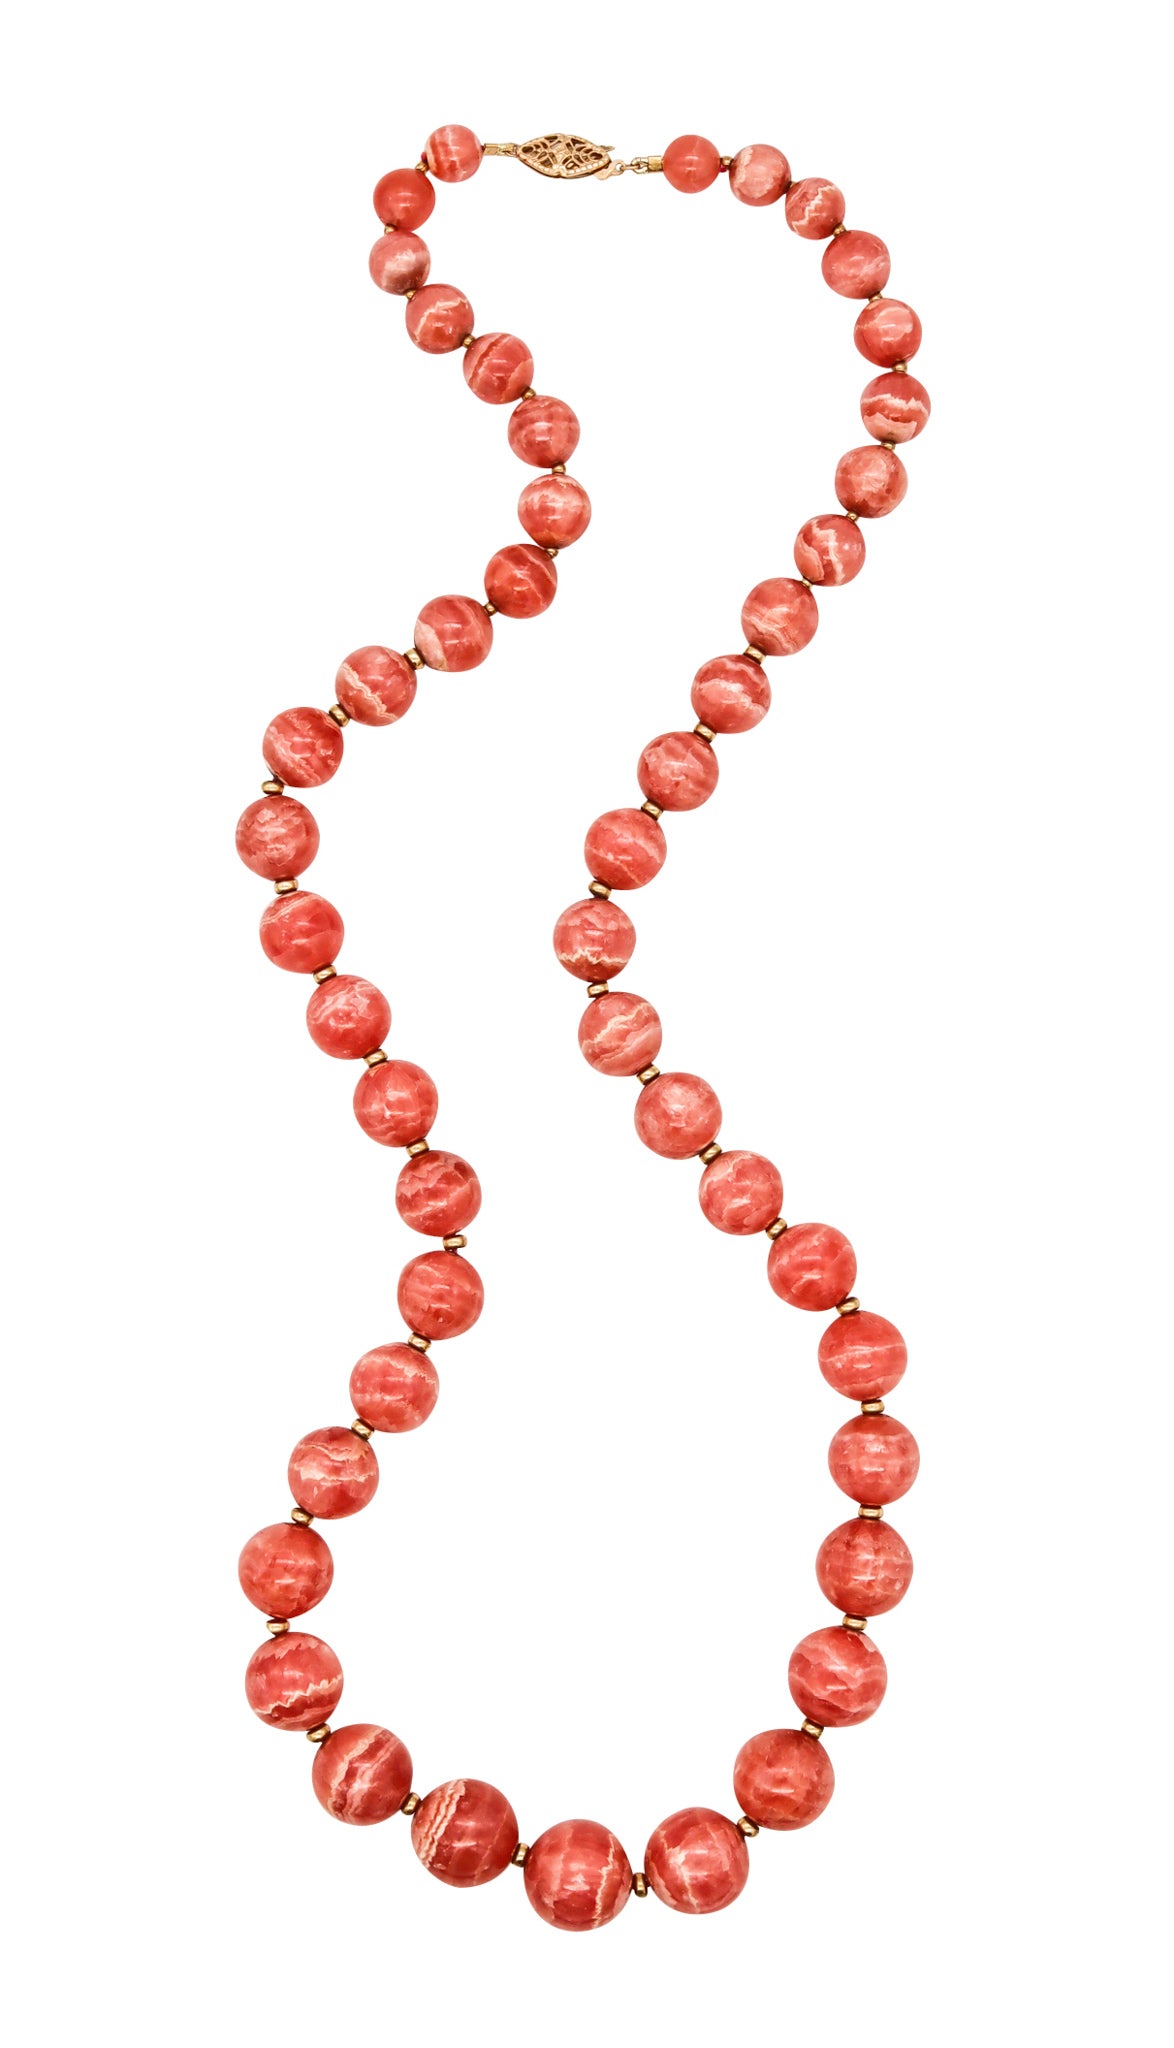 Rhodochrosite Graduated Necklace In 18Kt Yellow Gold With 645.25 Cts Of Superb Gemstones 8 To 15 MM